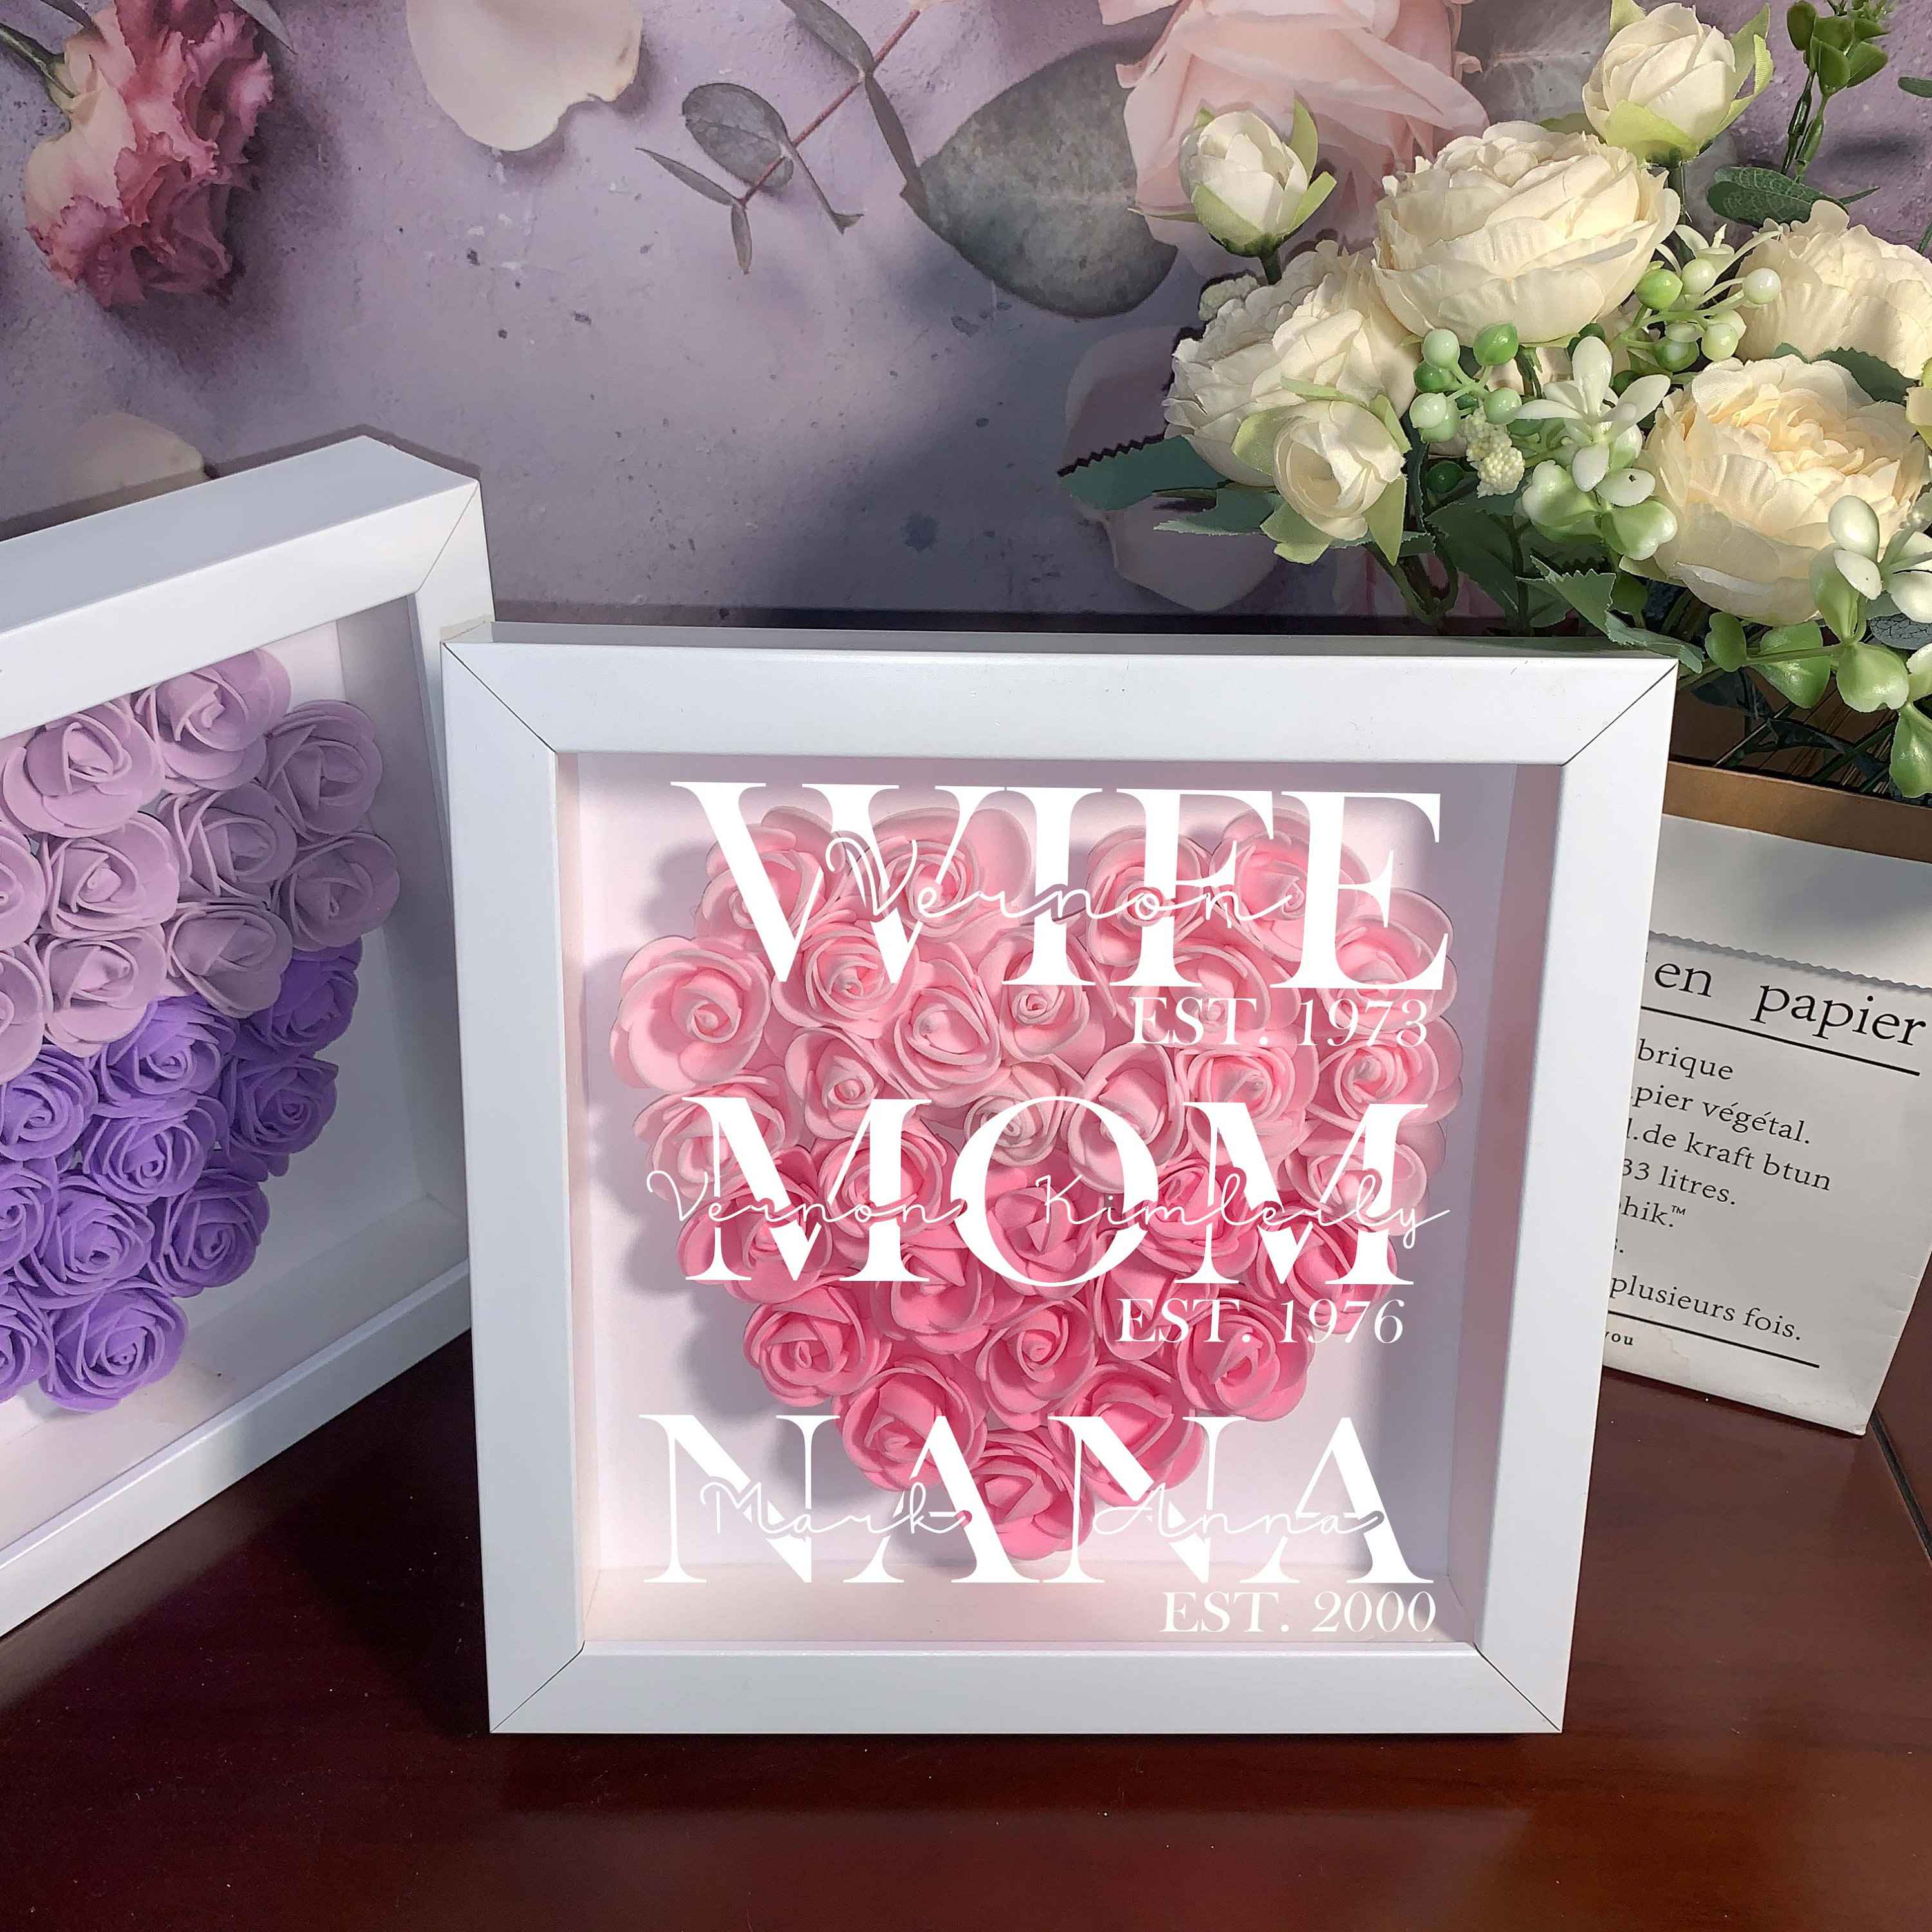 Wife Mom Grandma, Personalized Heart Flower Shadow Box, Rose Frame Box, Mother's Day Gift (Customized free)